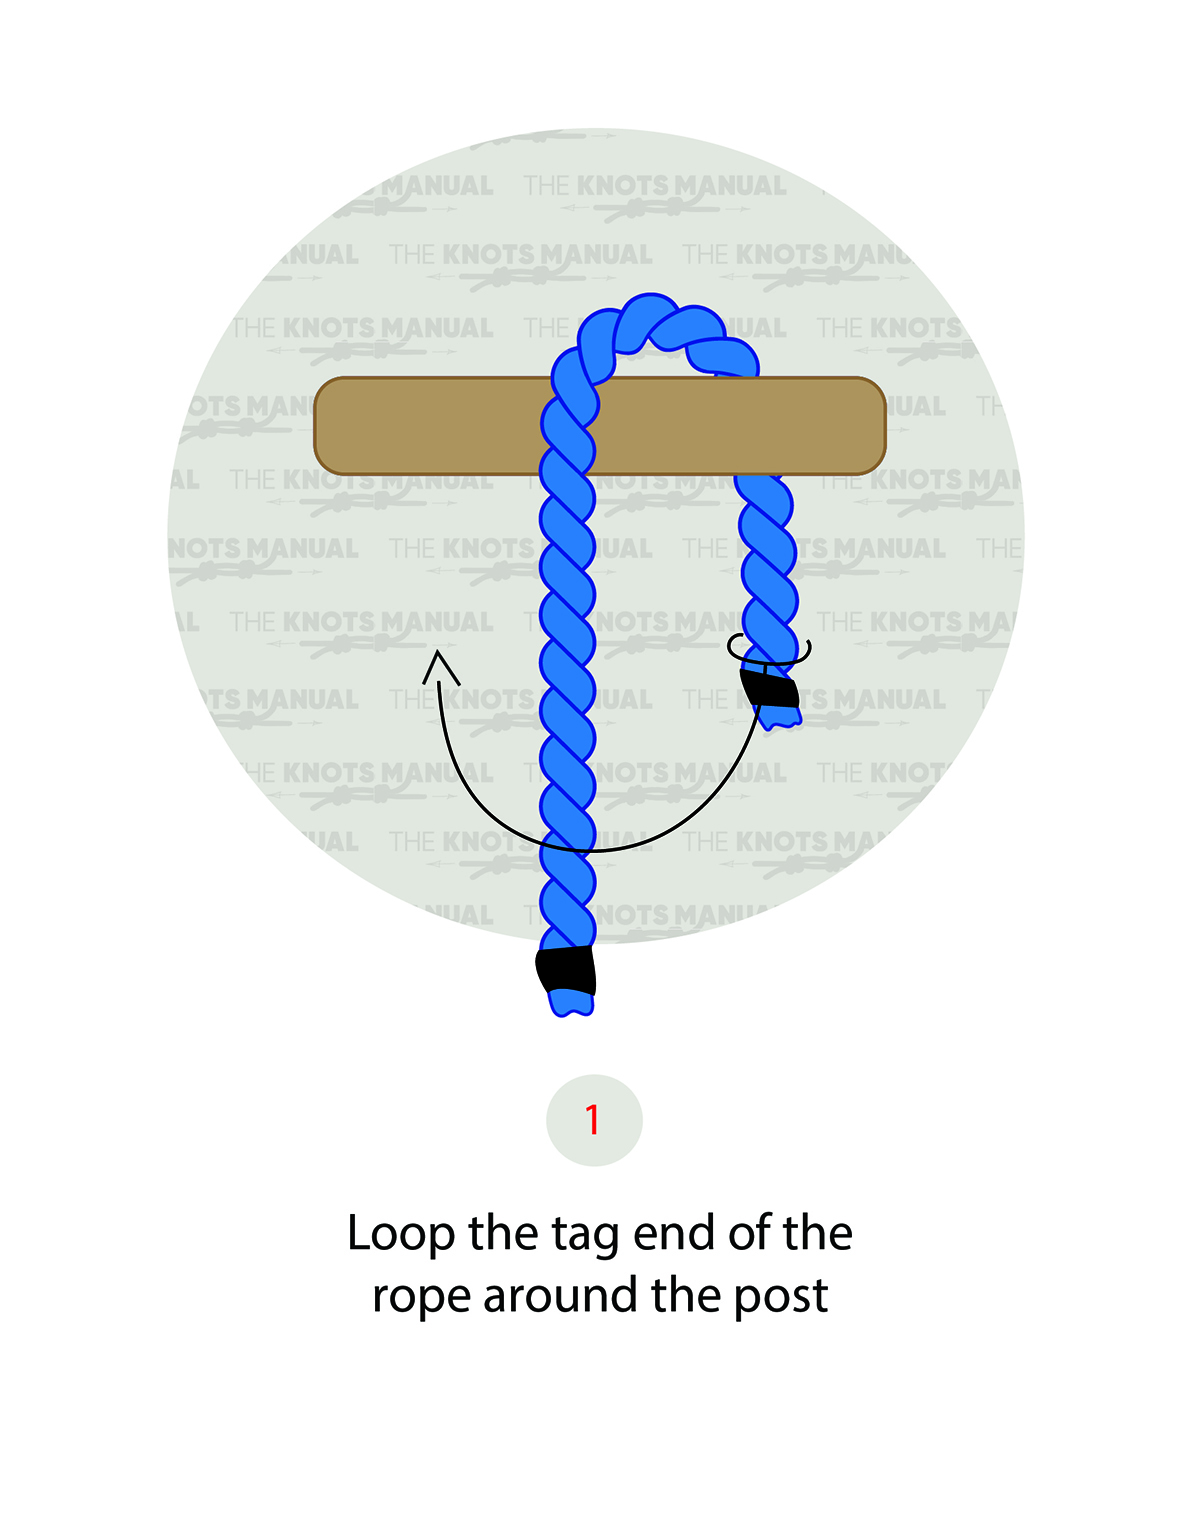 Rolling Hitch Knot - Step 1